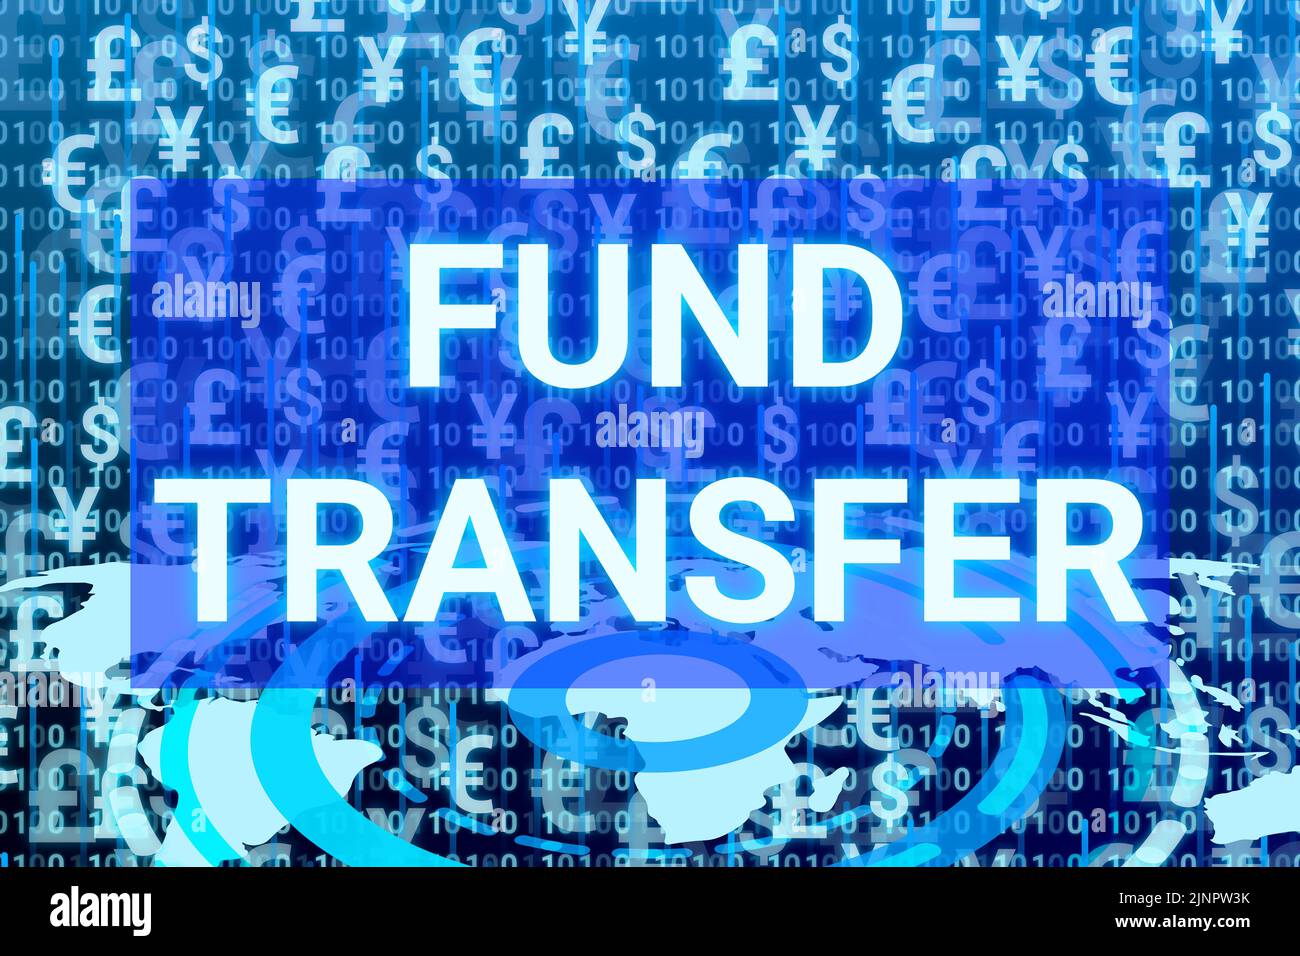 world wide fund transfer digital background with world map. concept for world trade, business and currency demand. Stock Photo